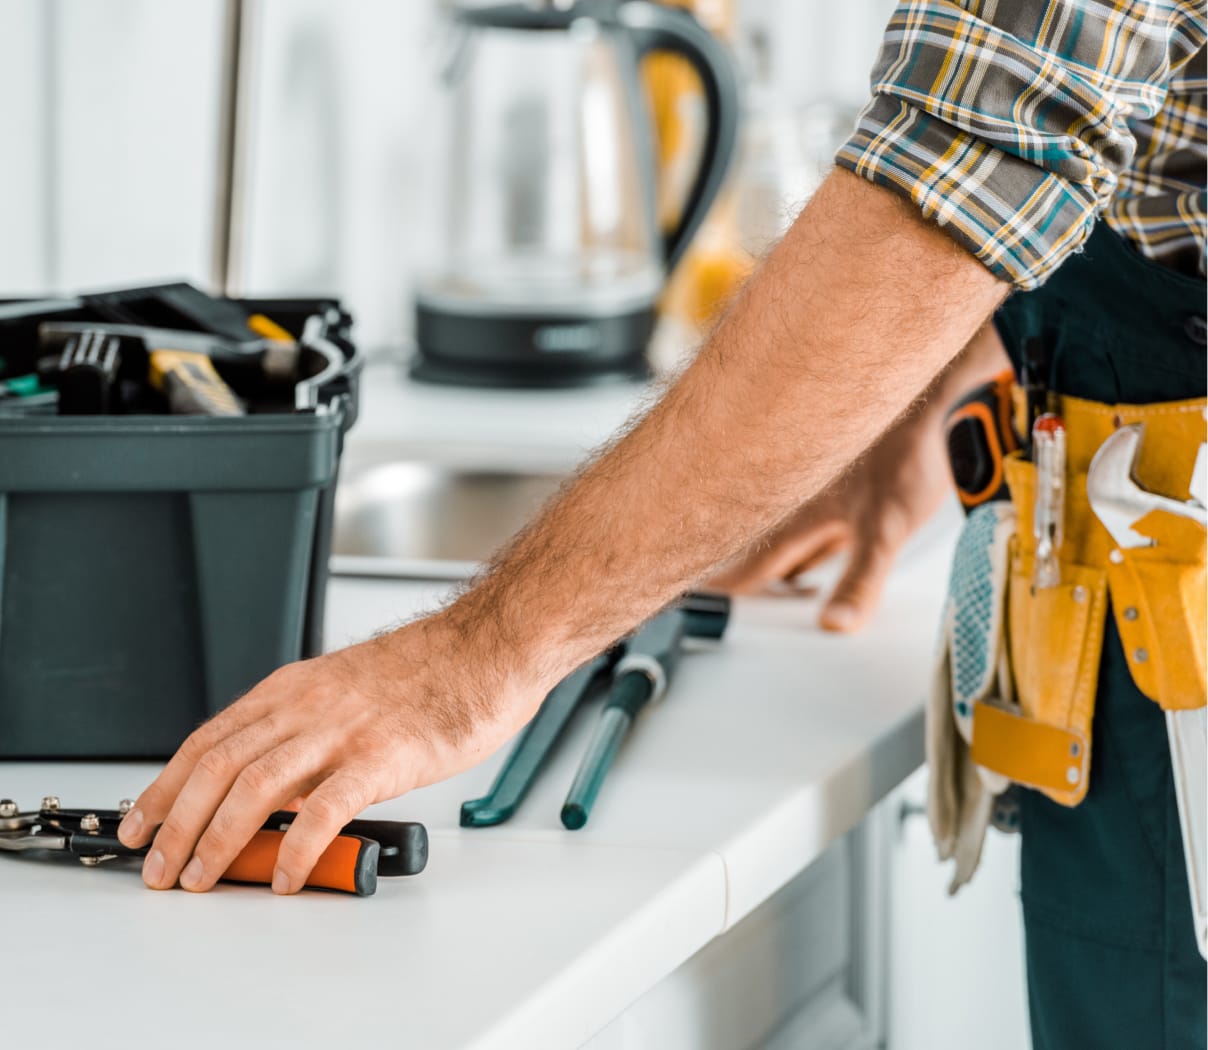 Worker wearing a tool belt reaching for tools on a counter